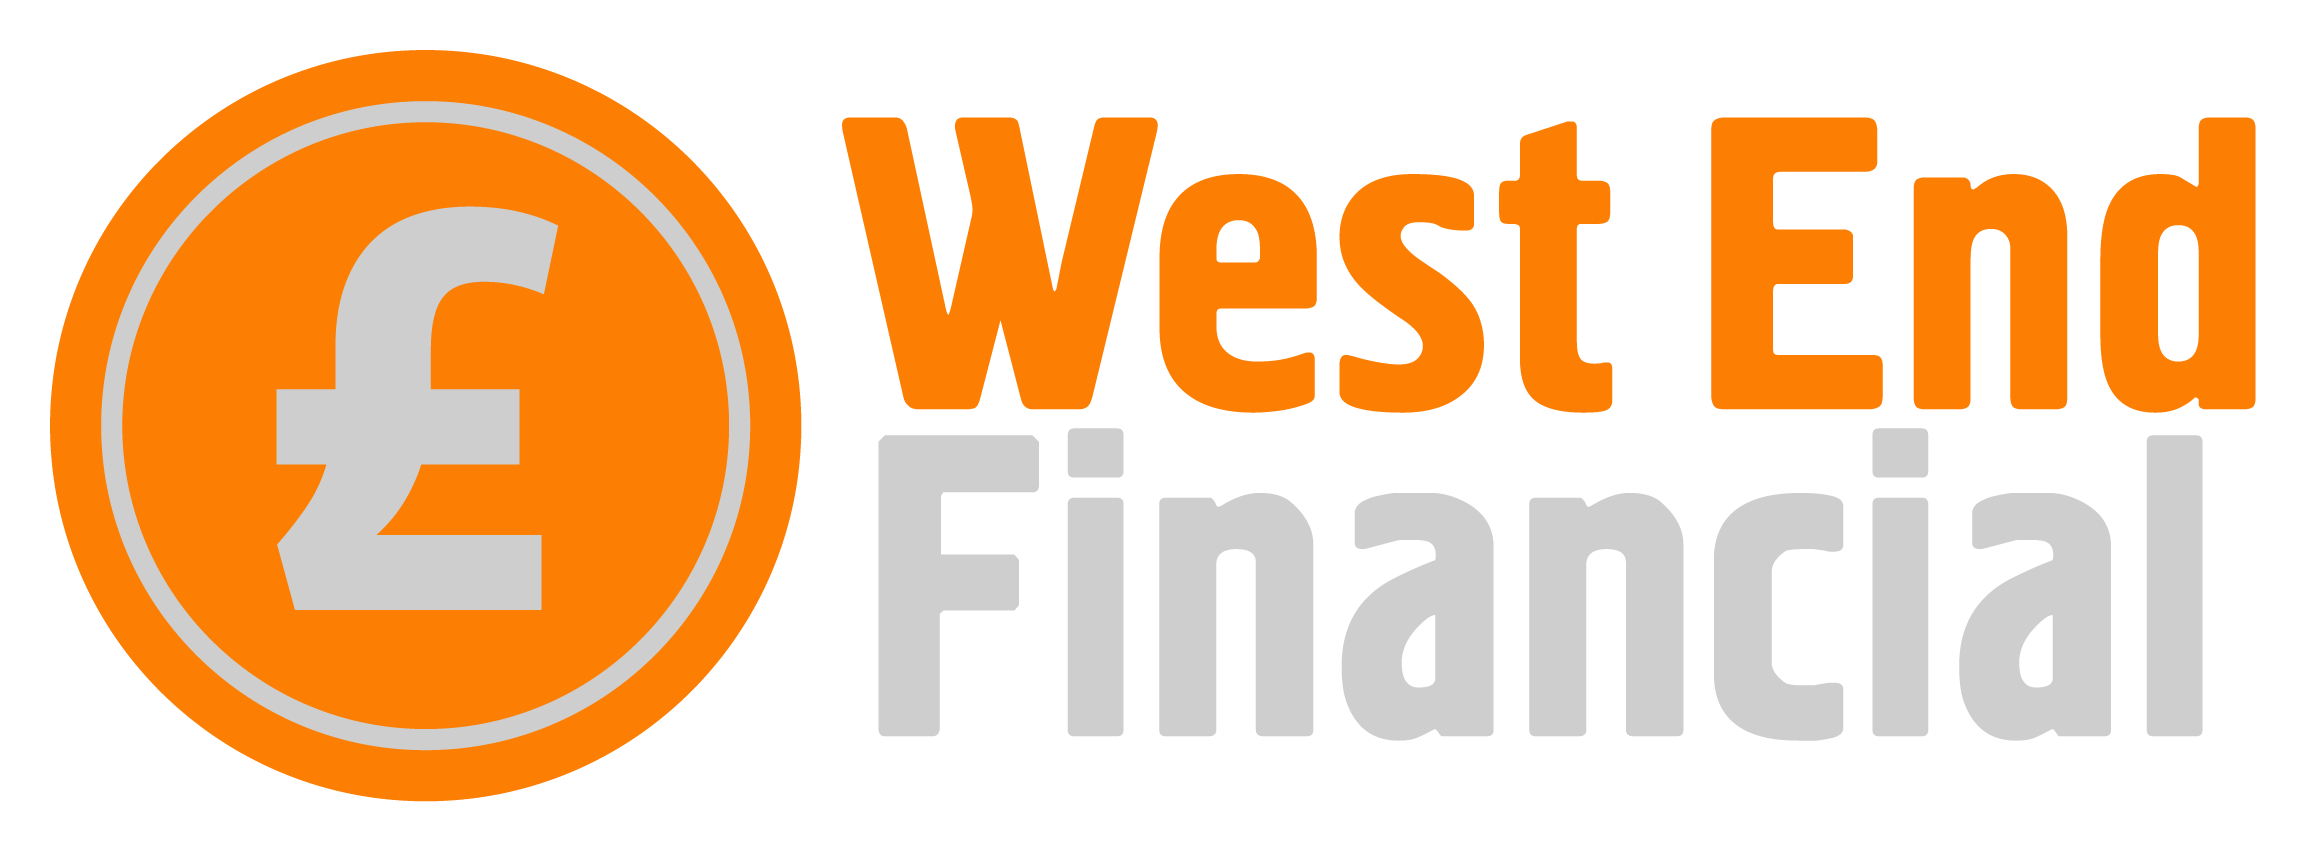 West End Financial